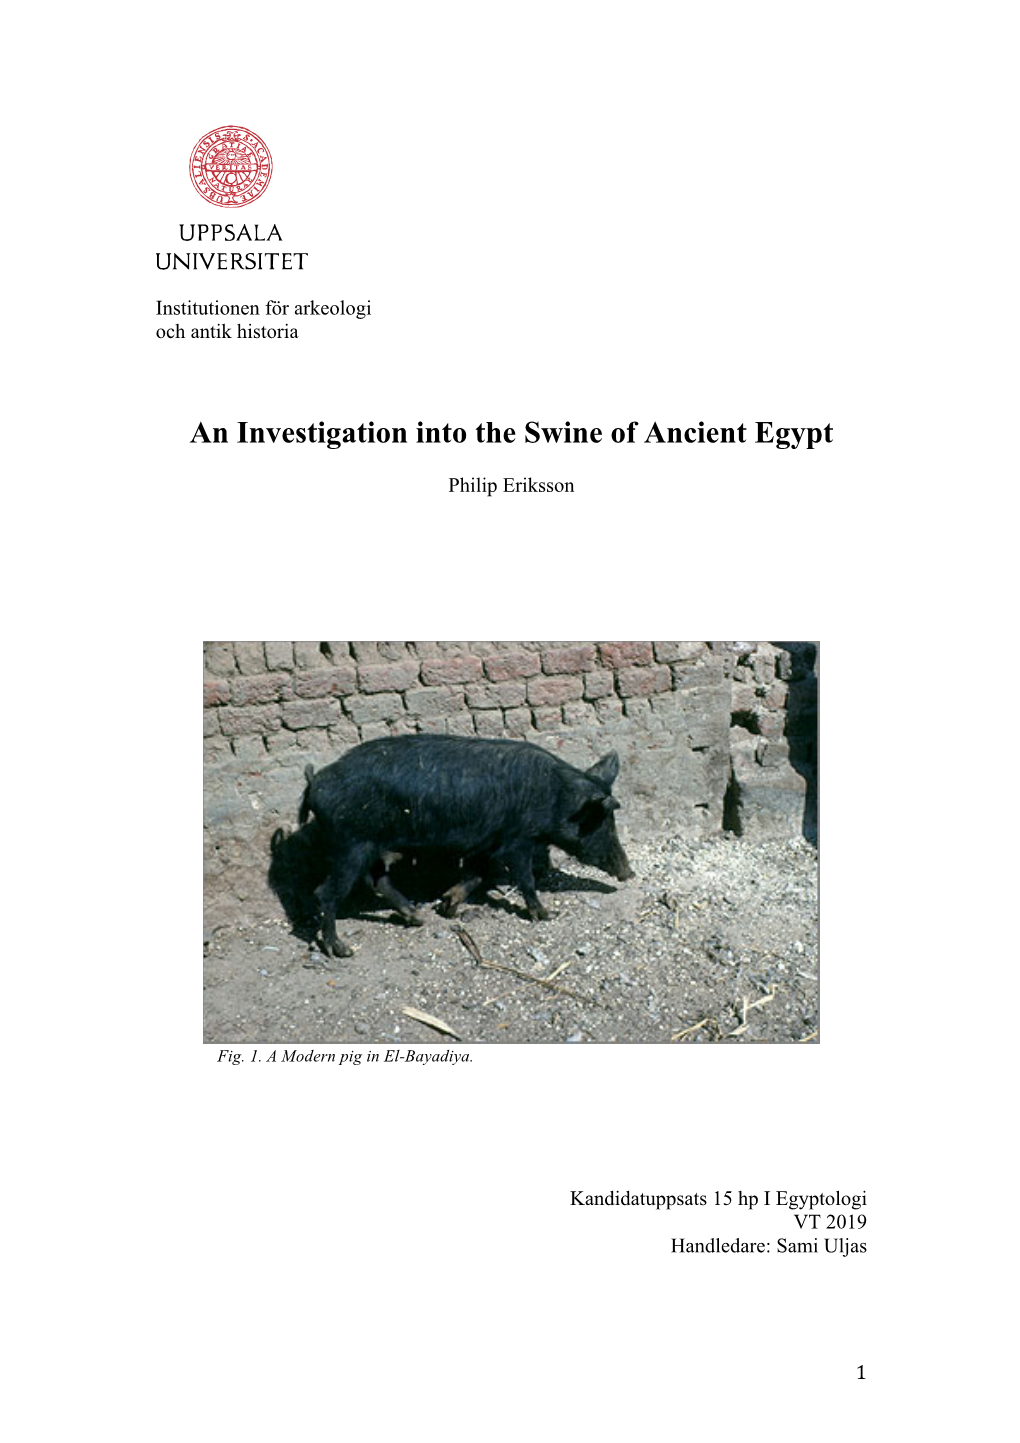 An Investigation Into the Swine of Ancient Egypt